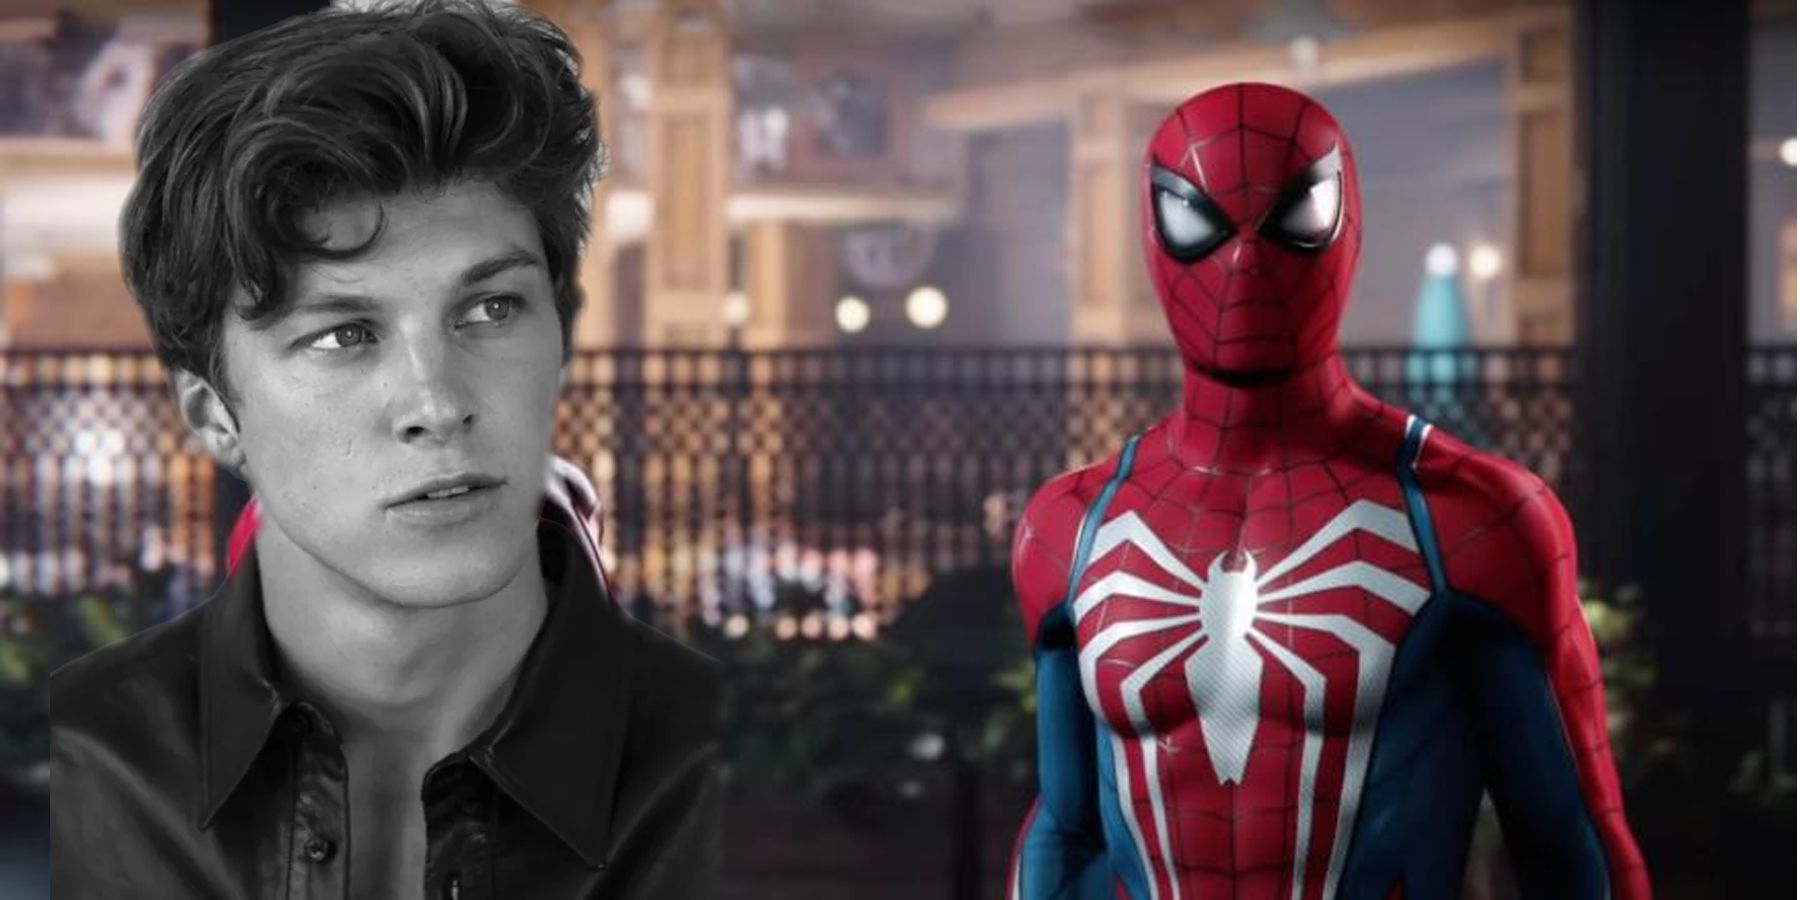 Images Show How Marvel’s Spider-Man’s Peter Parker Would Look With Long Hair